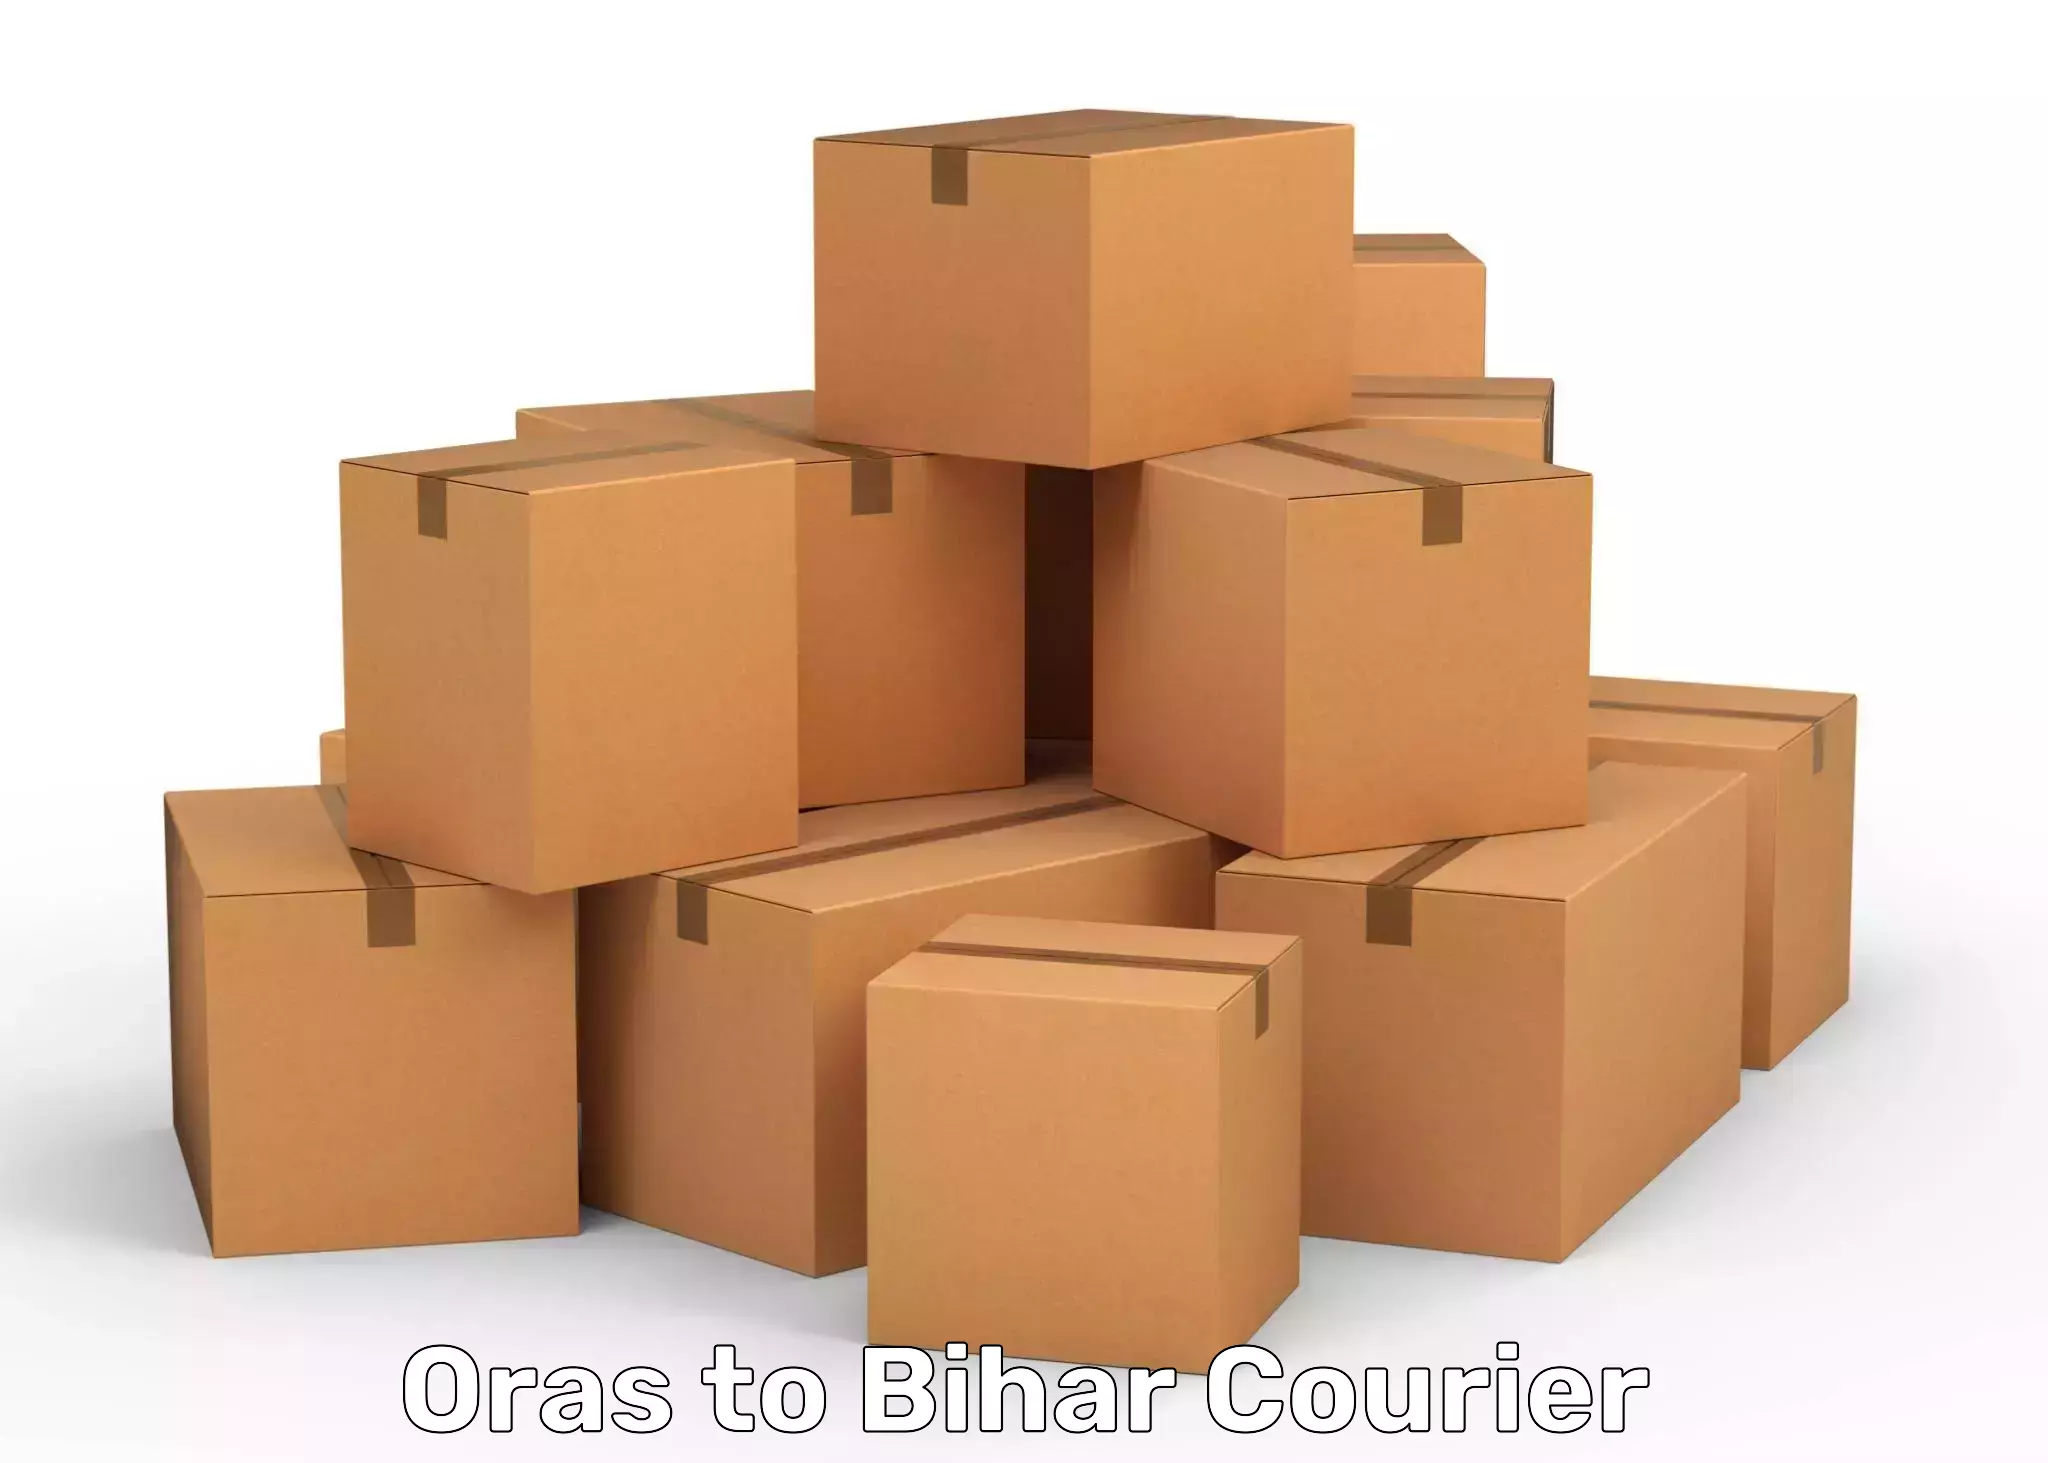 Global courier networks Oras to Singhia